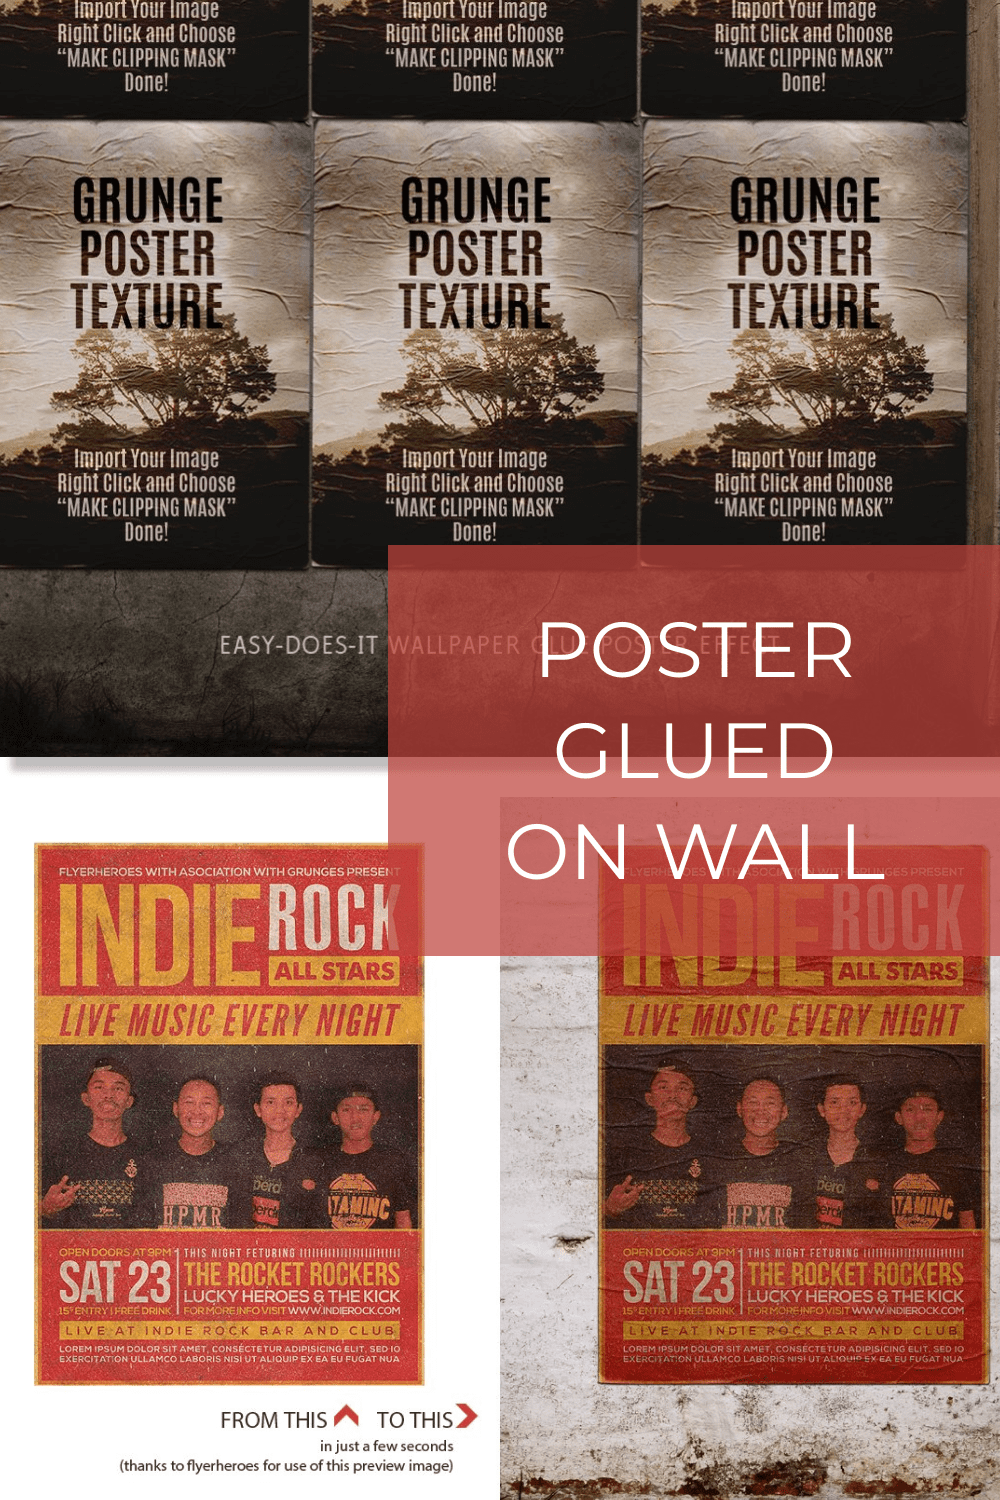 Poster Glued on Wall pinterest image.